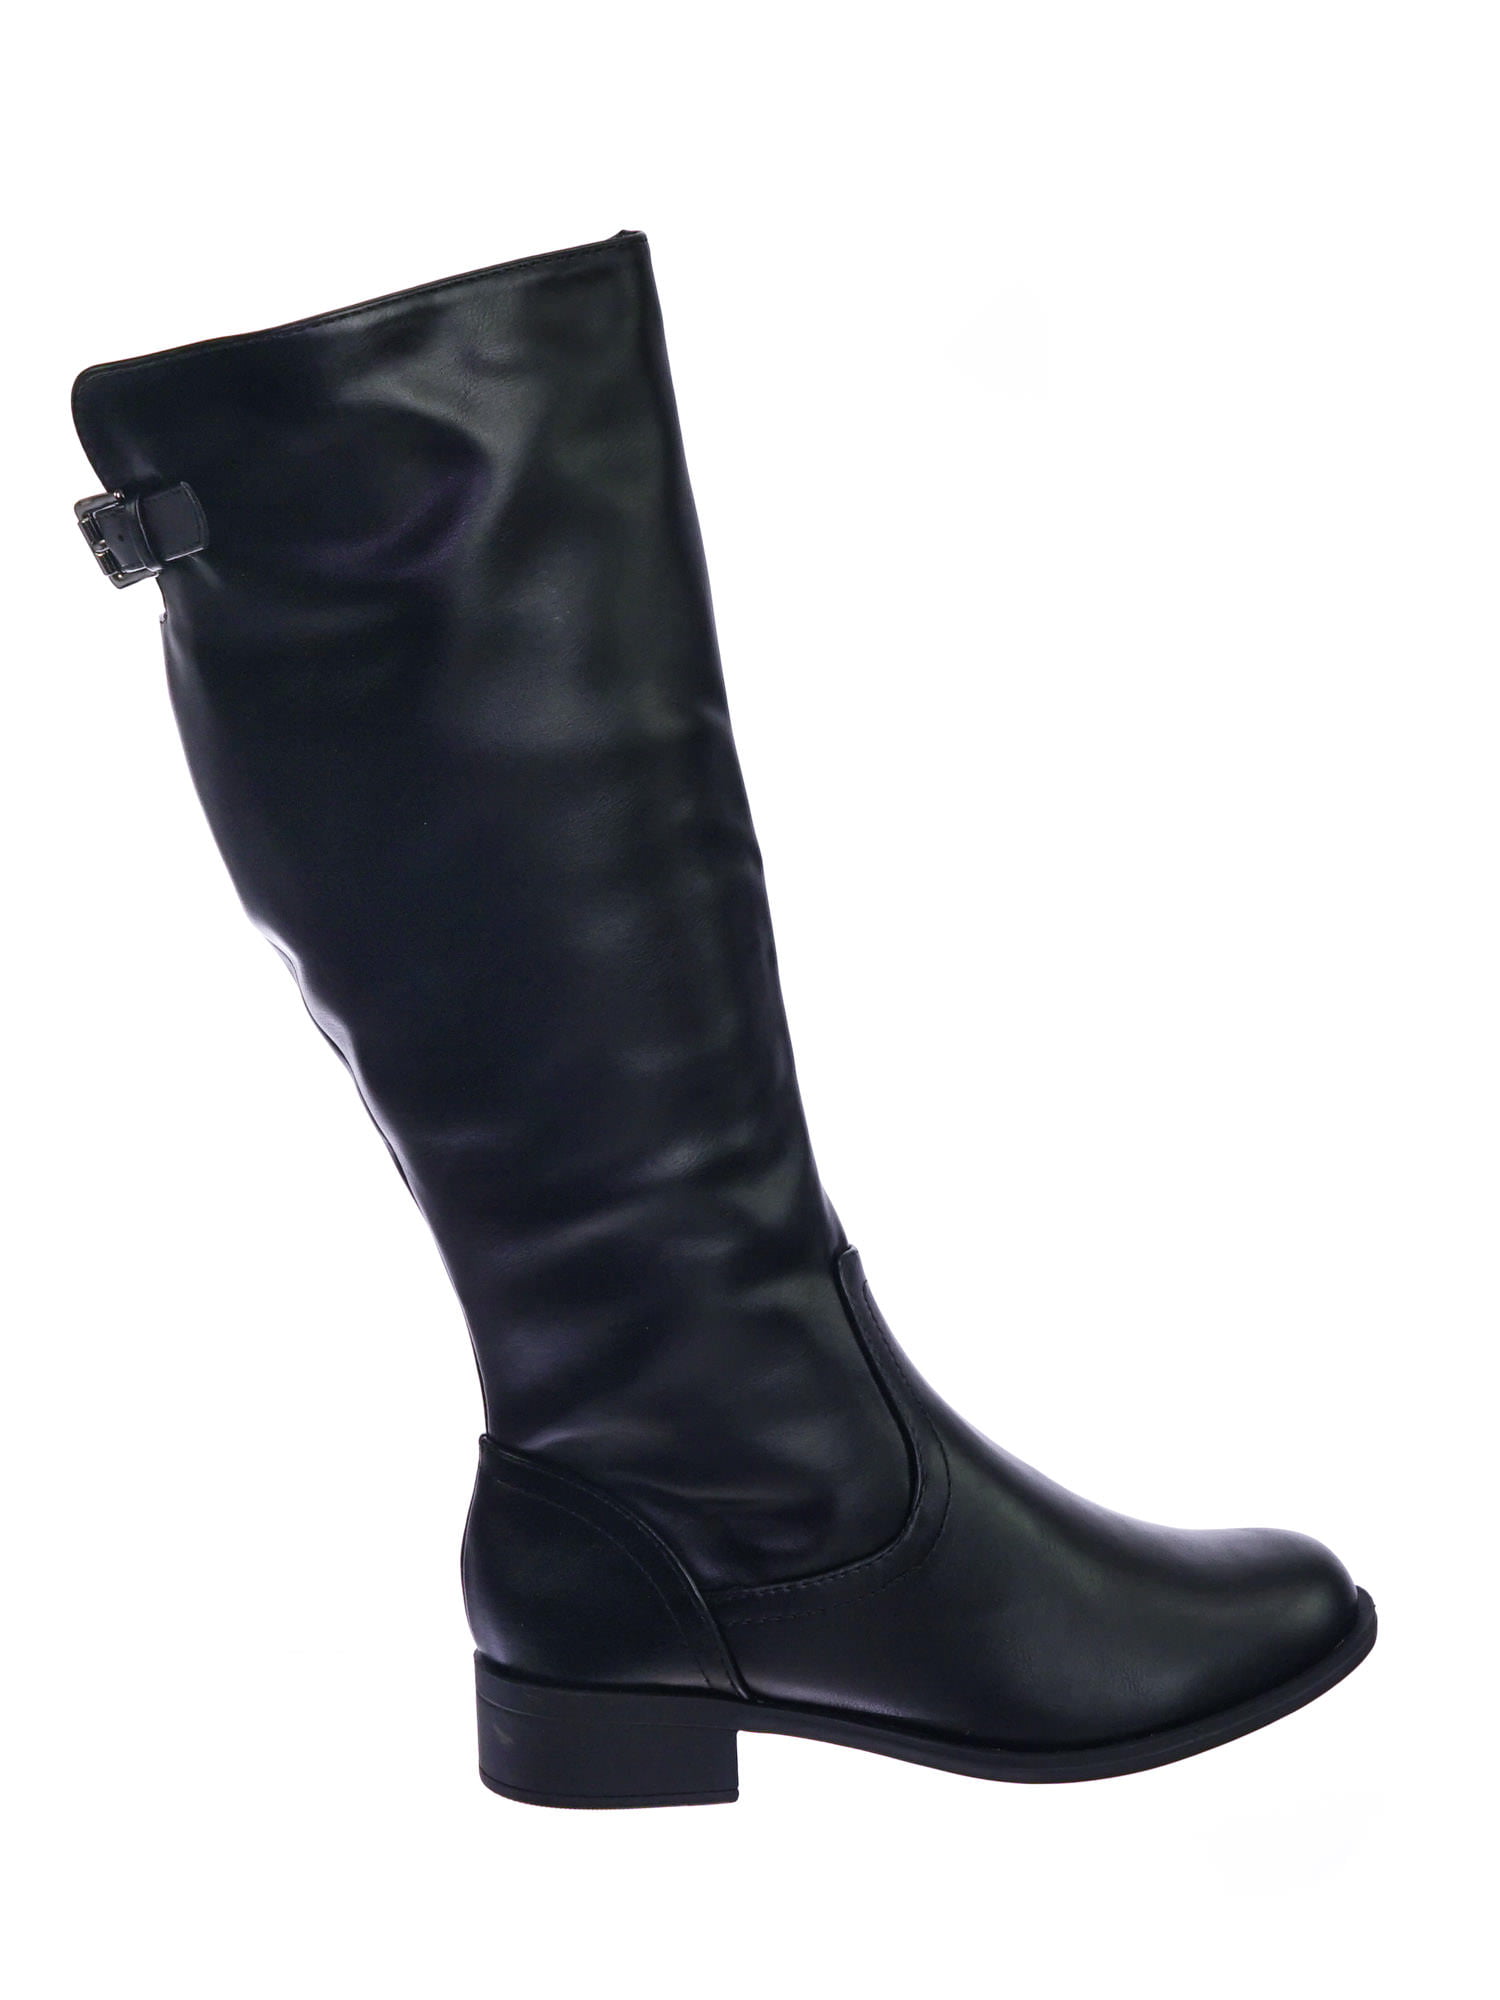 COURT Womens Black Faux Leather Buckle Zip Low Block Heel Knee High Riding Boots 